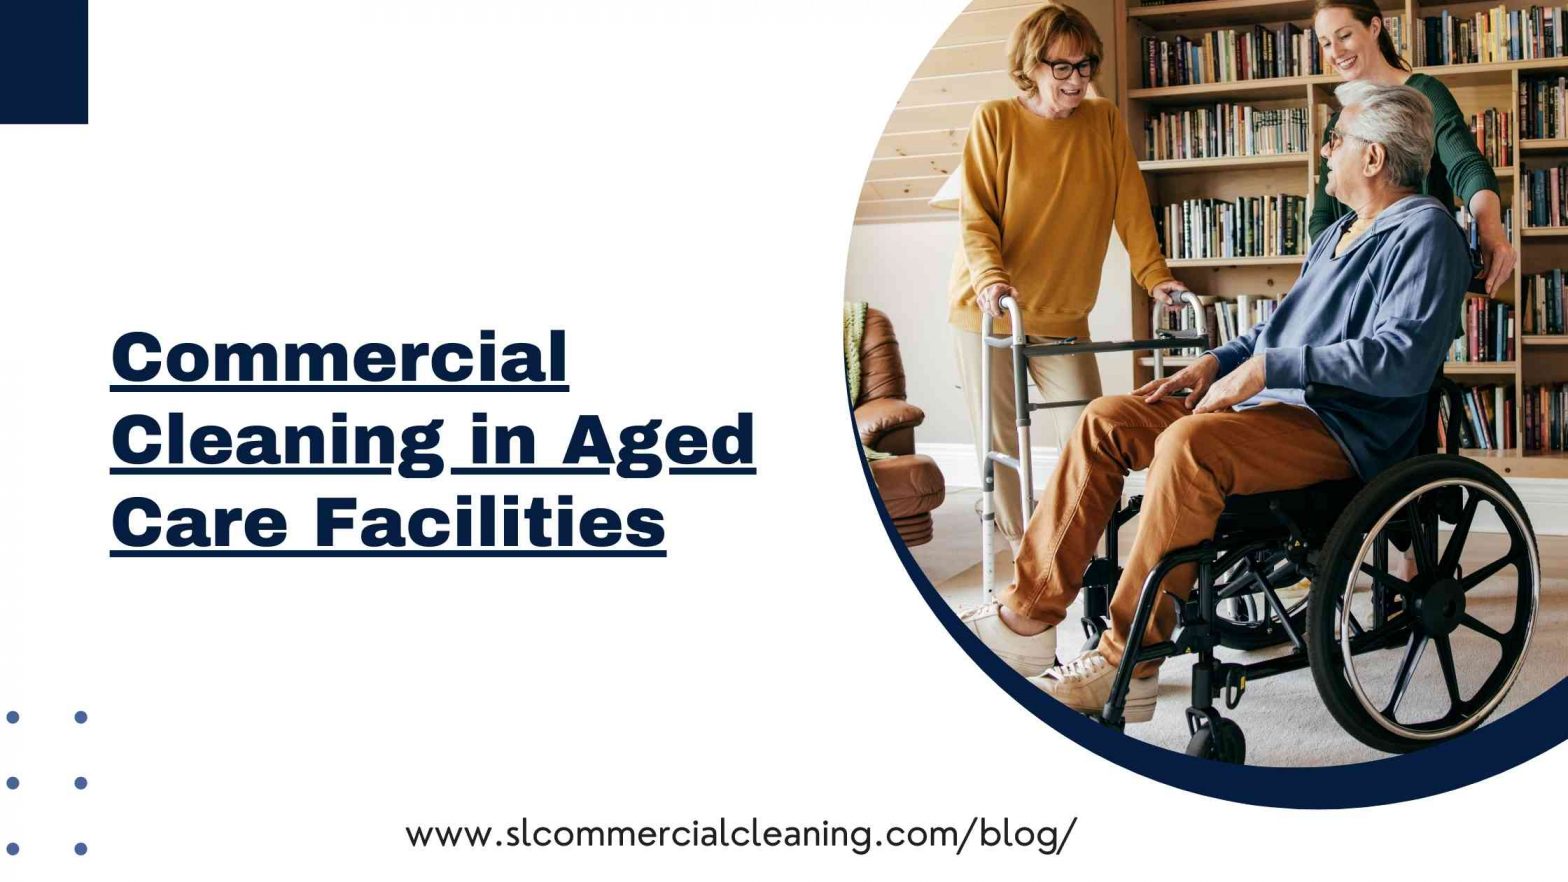 Commercial Cleaning in Aged Care Facilities